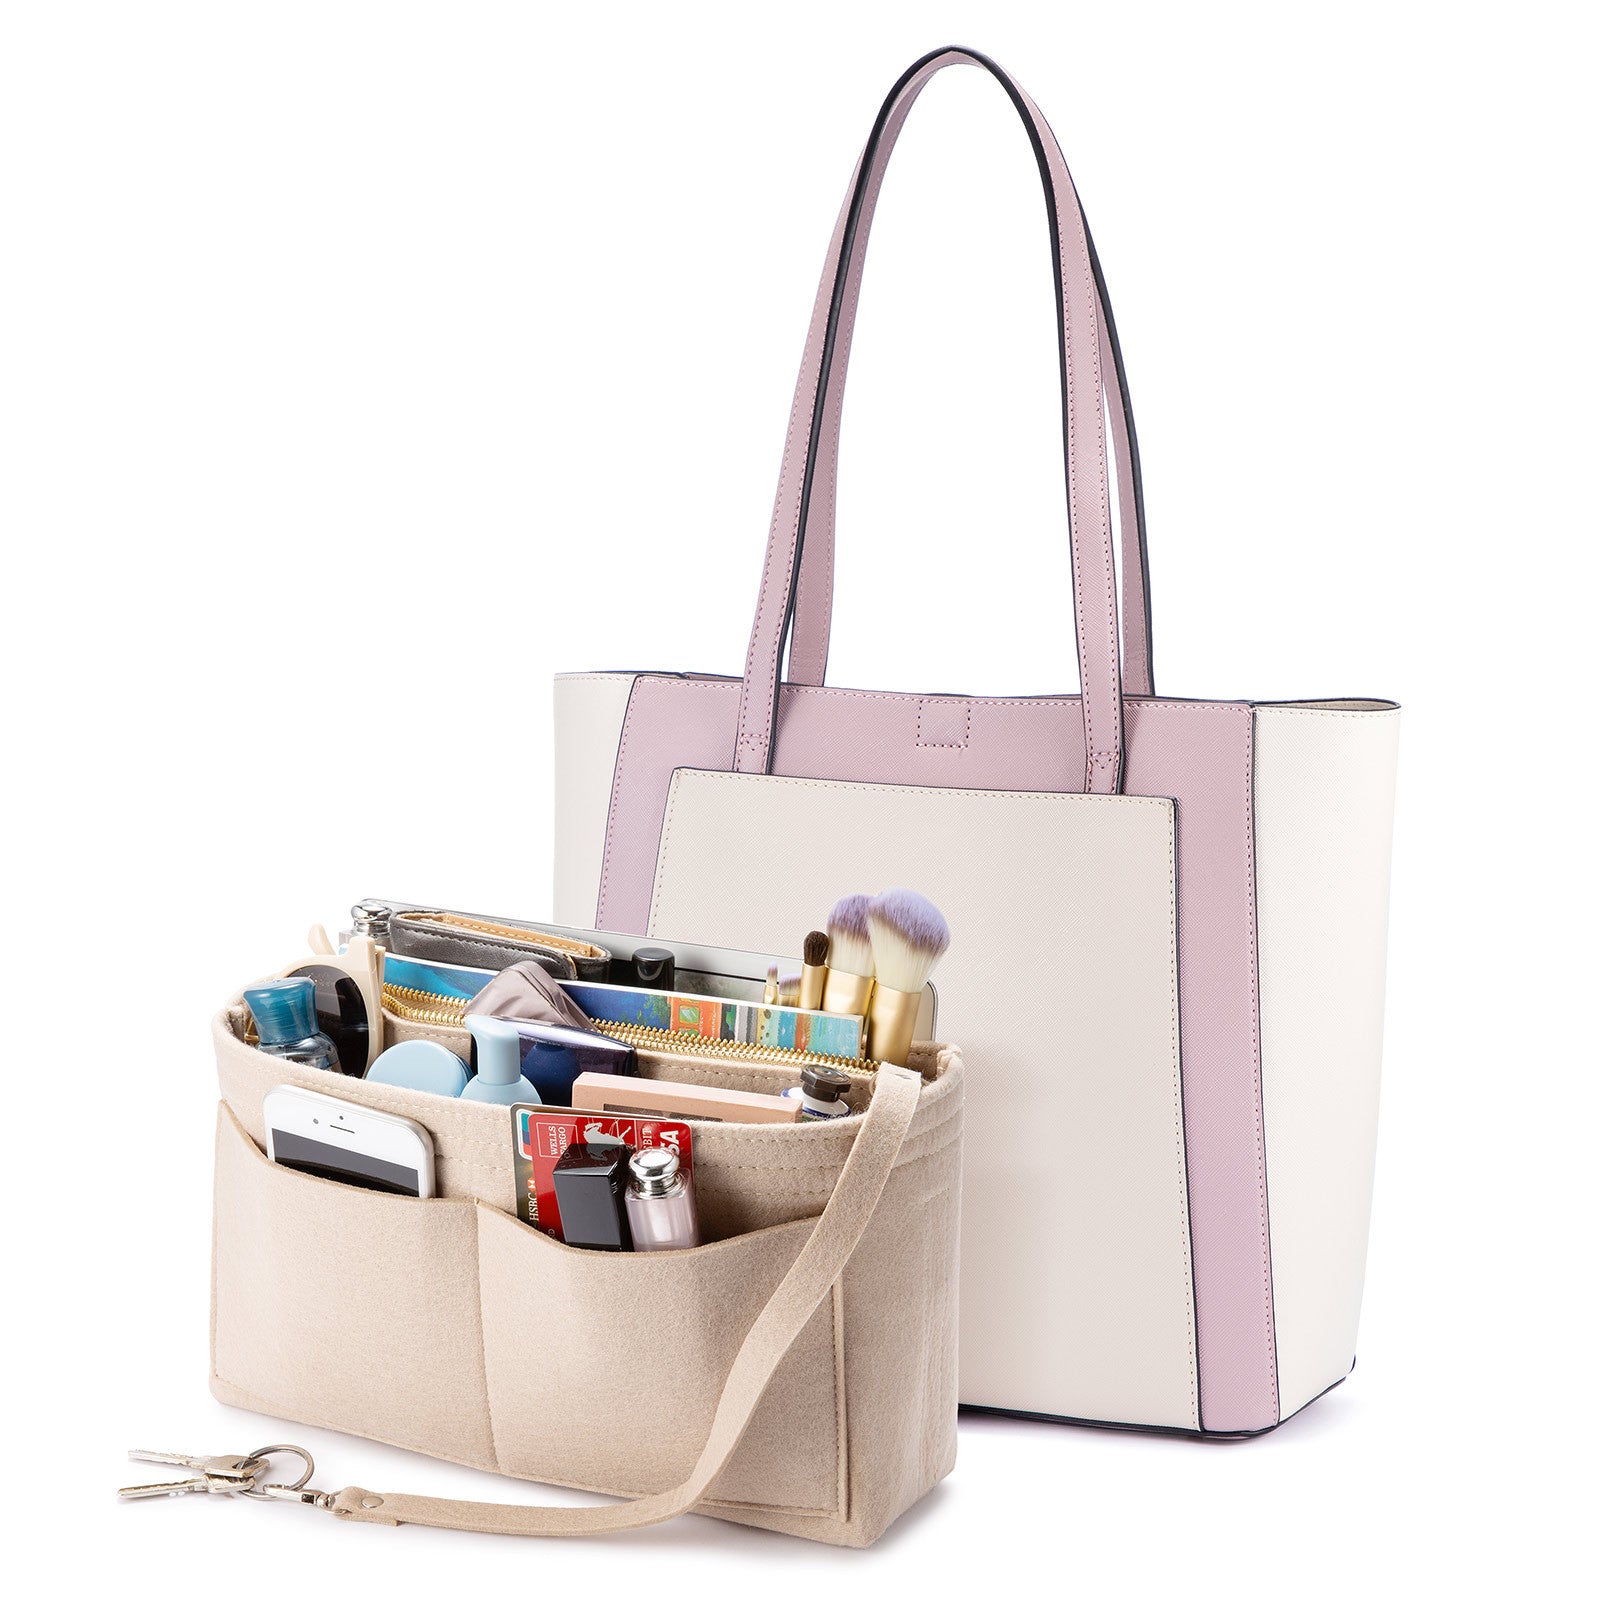 Women's Tote bag Set – Loveyourself